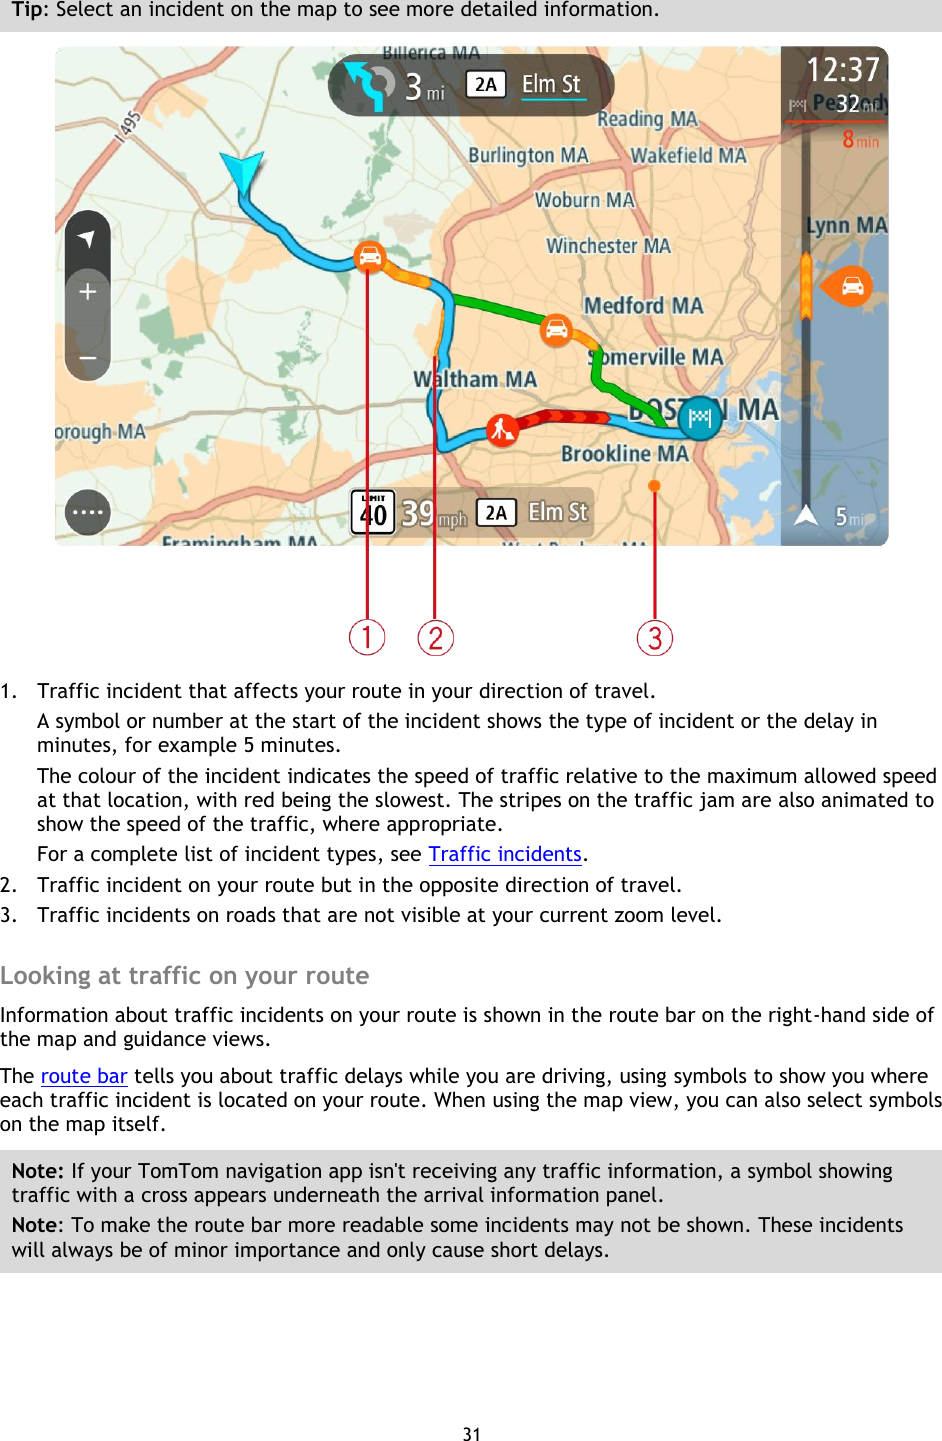 31    Tip: Select an incident on the map to see more detailed information.  1. Traffic incident that affects your route in your direction of travel. A symbol or number at the start of the incident shows the type of incident or the delay in minutes, for example 5 minutes.   The colour of the incident indicates the speed of traffic relative to the maximum allowed speed at that location, with red being the slowest. The stripes on the traffic jam are also animated to show the speed of the traffic, where appropriate.   For a complete list of incident types, see Traffic incidents. 2. Traffic incident on your route but in the opposite direction of travel. 3. Traffic incidents on roads that are not visible at your current zoom level.  Looking at traffic on your route Information about traffic incidents on your route is shown in the route bar on the right-hand side of the map and guidance views. The route bar tells you about traffic delays while you are driving, using symbols to show you where each traffic incident is located on your route. When using the map view, you can also select symbols on the map itself. Note: If your TomTom navigation app isn&apos;t receiving any traffic information, a symbol showing traffic with a cross appears underneath the arrival information panel. Note: To make the route bar more readable some incidents may not be shown. These incidents will always be of minor importance and only cause short delays. 